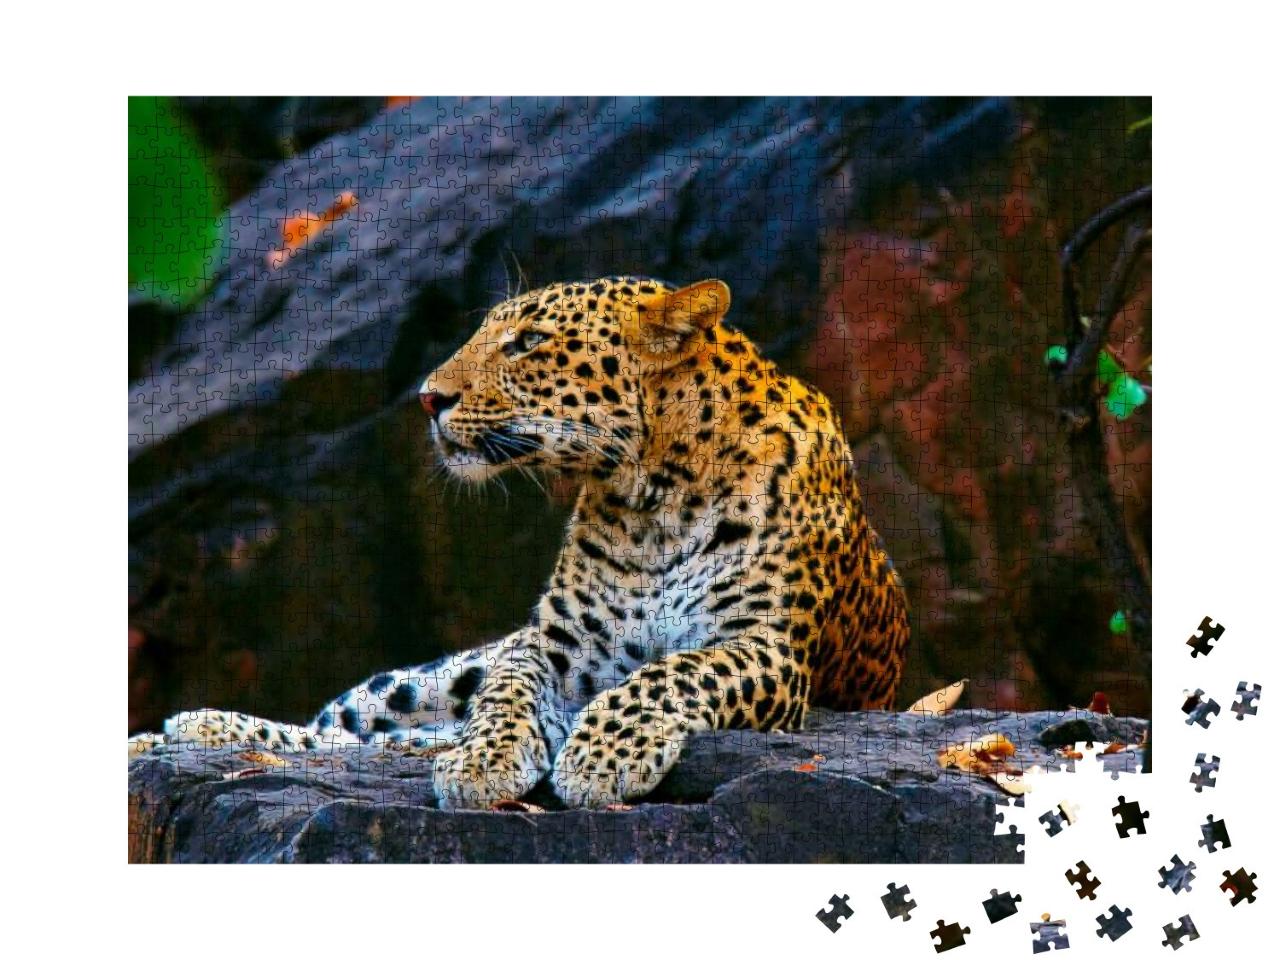 Indian Leopard, Panthera Pardus Fusca, Ranthambhore Tiger... Jigsaw Puzzle with 1000 pieces